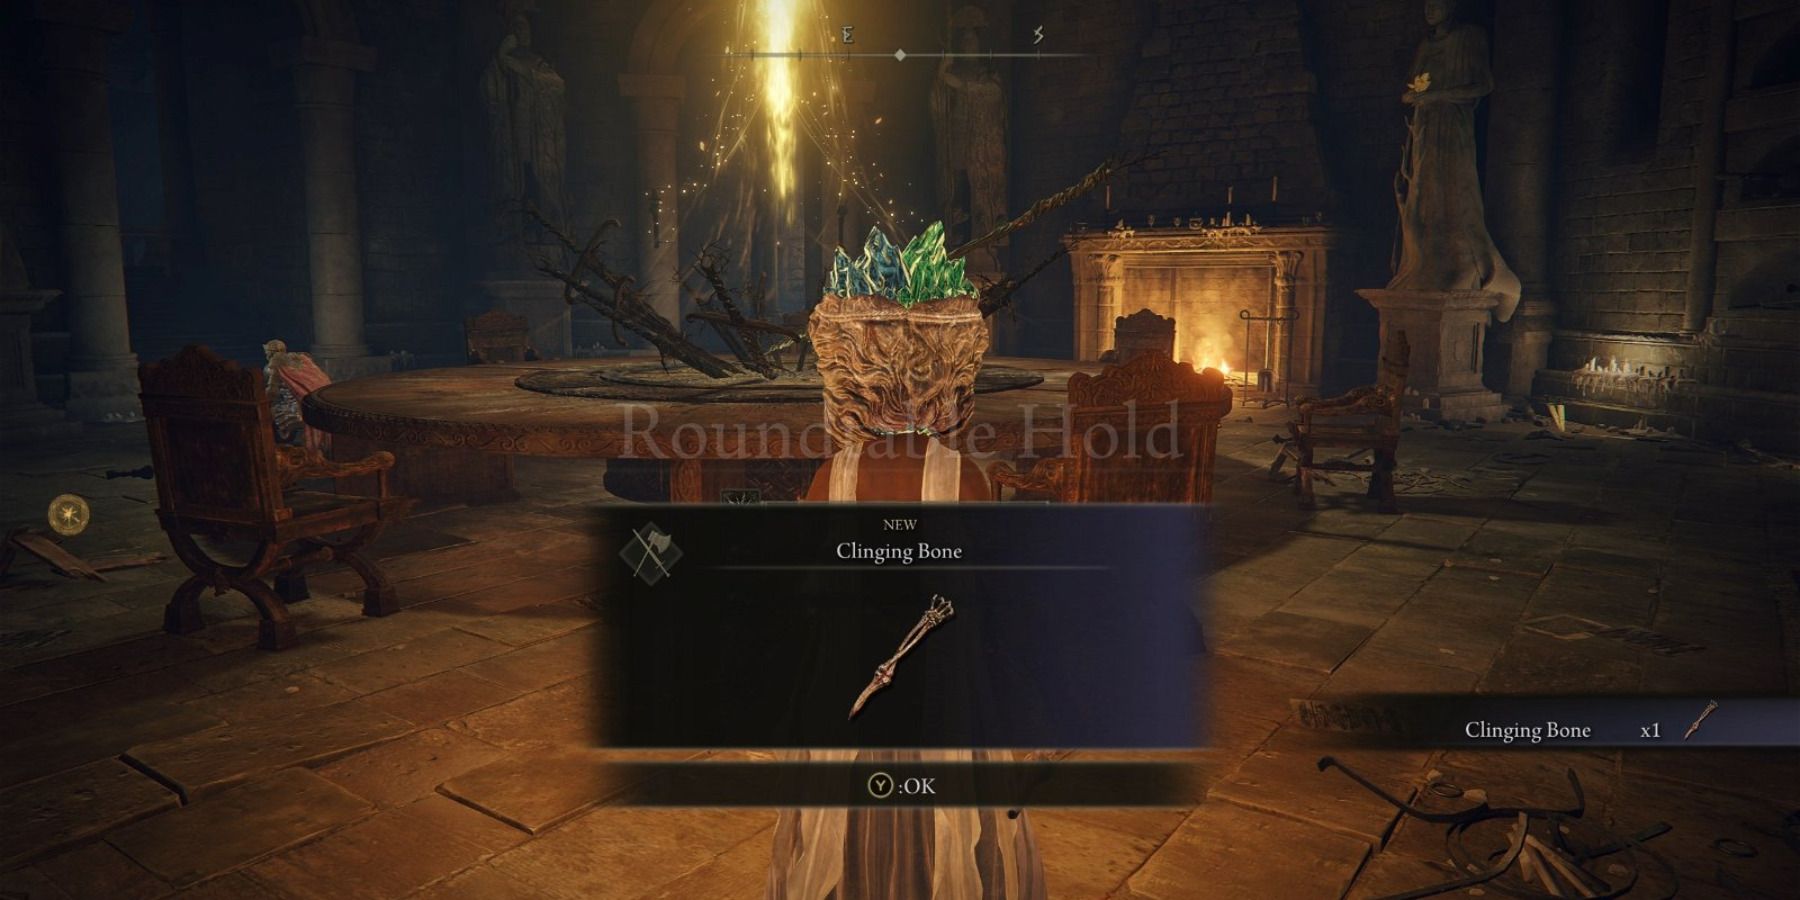 Player obtaining Clinging Bone weapon in Elden Ring.